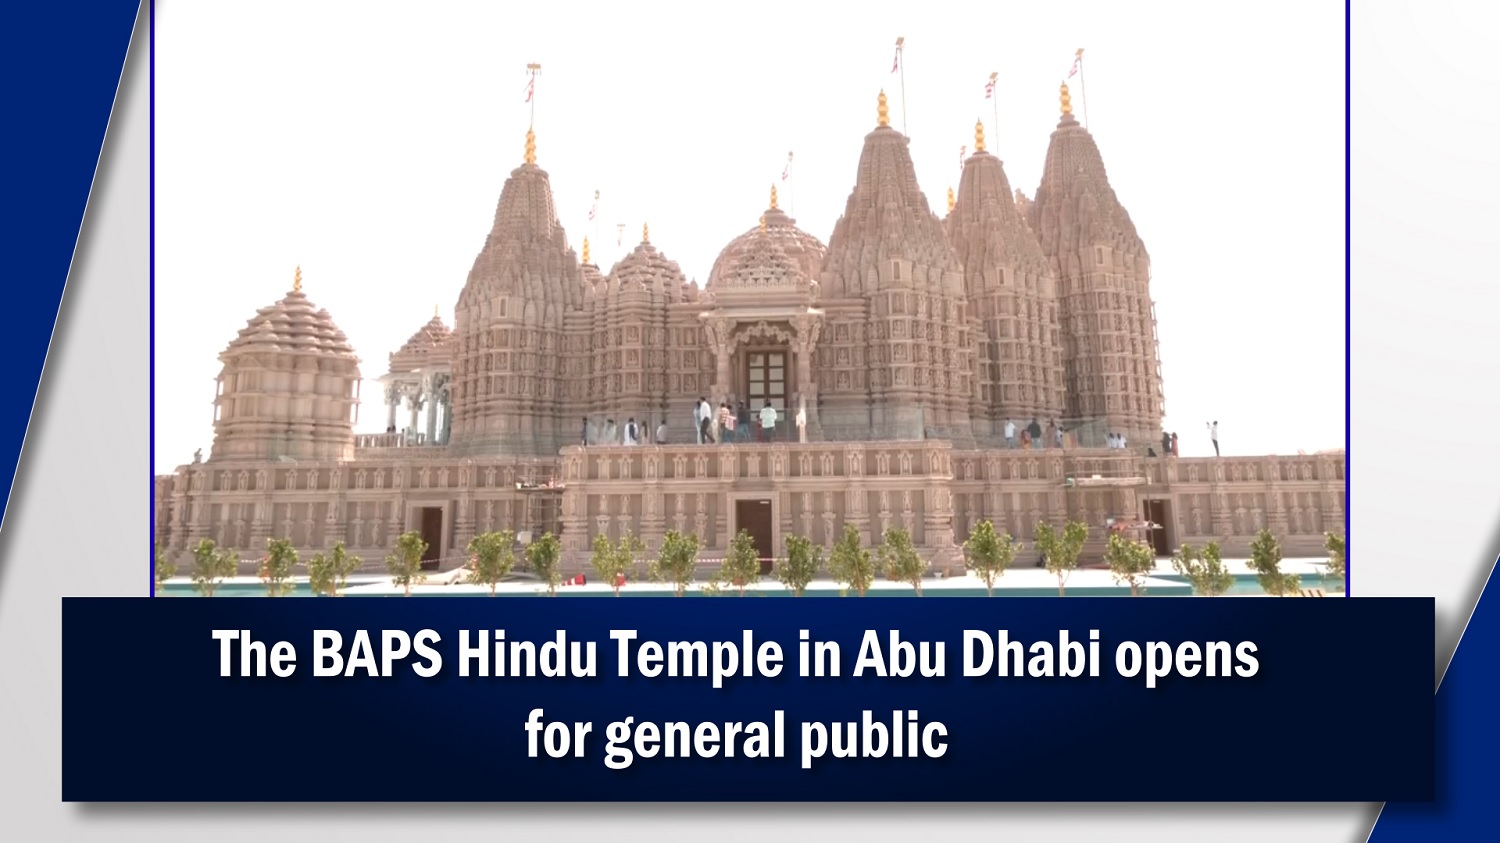 The BAPS Hindu Temple in Abu Dhabi opens for general public